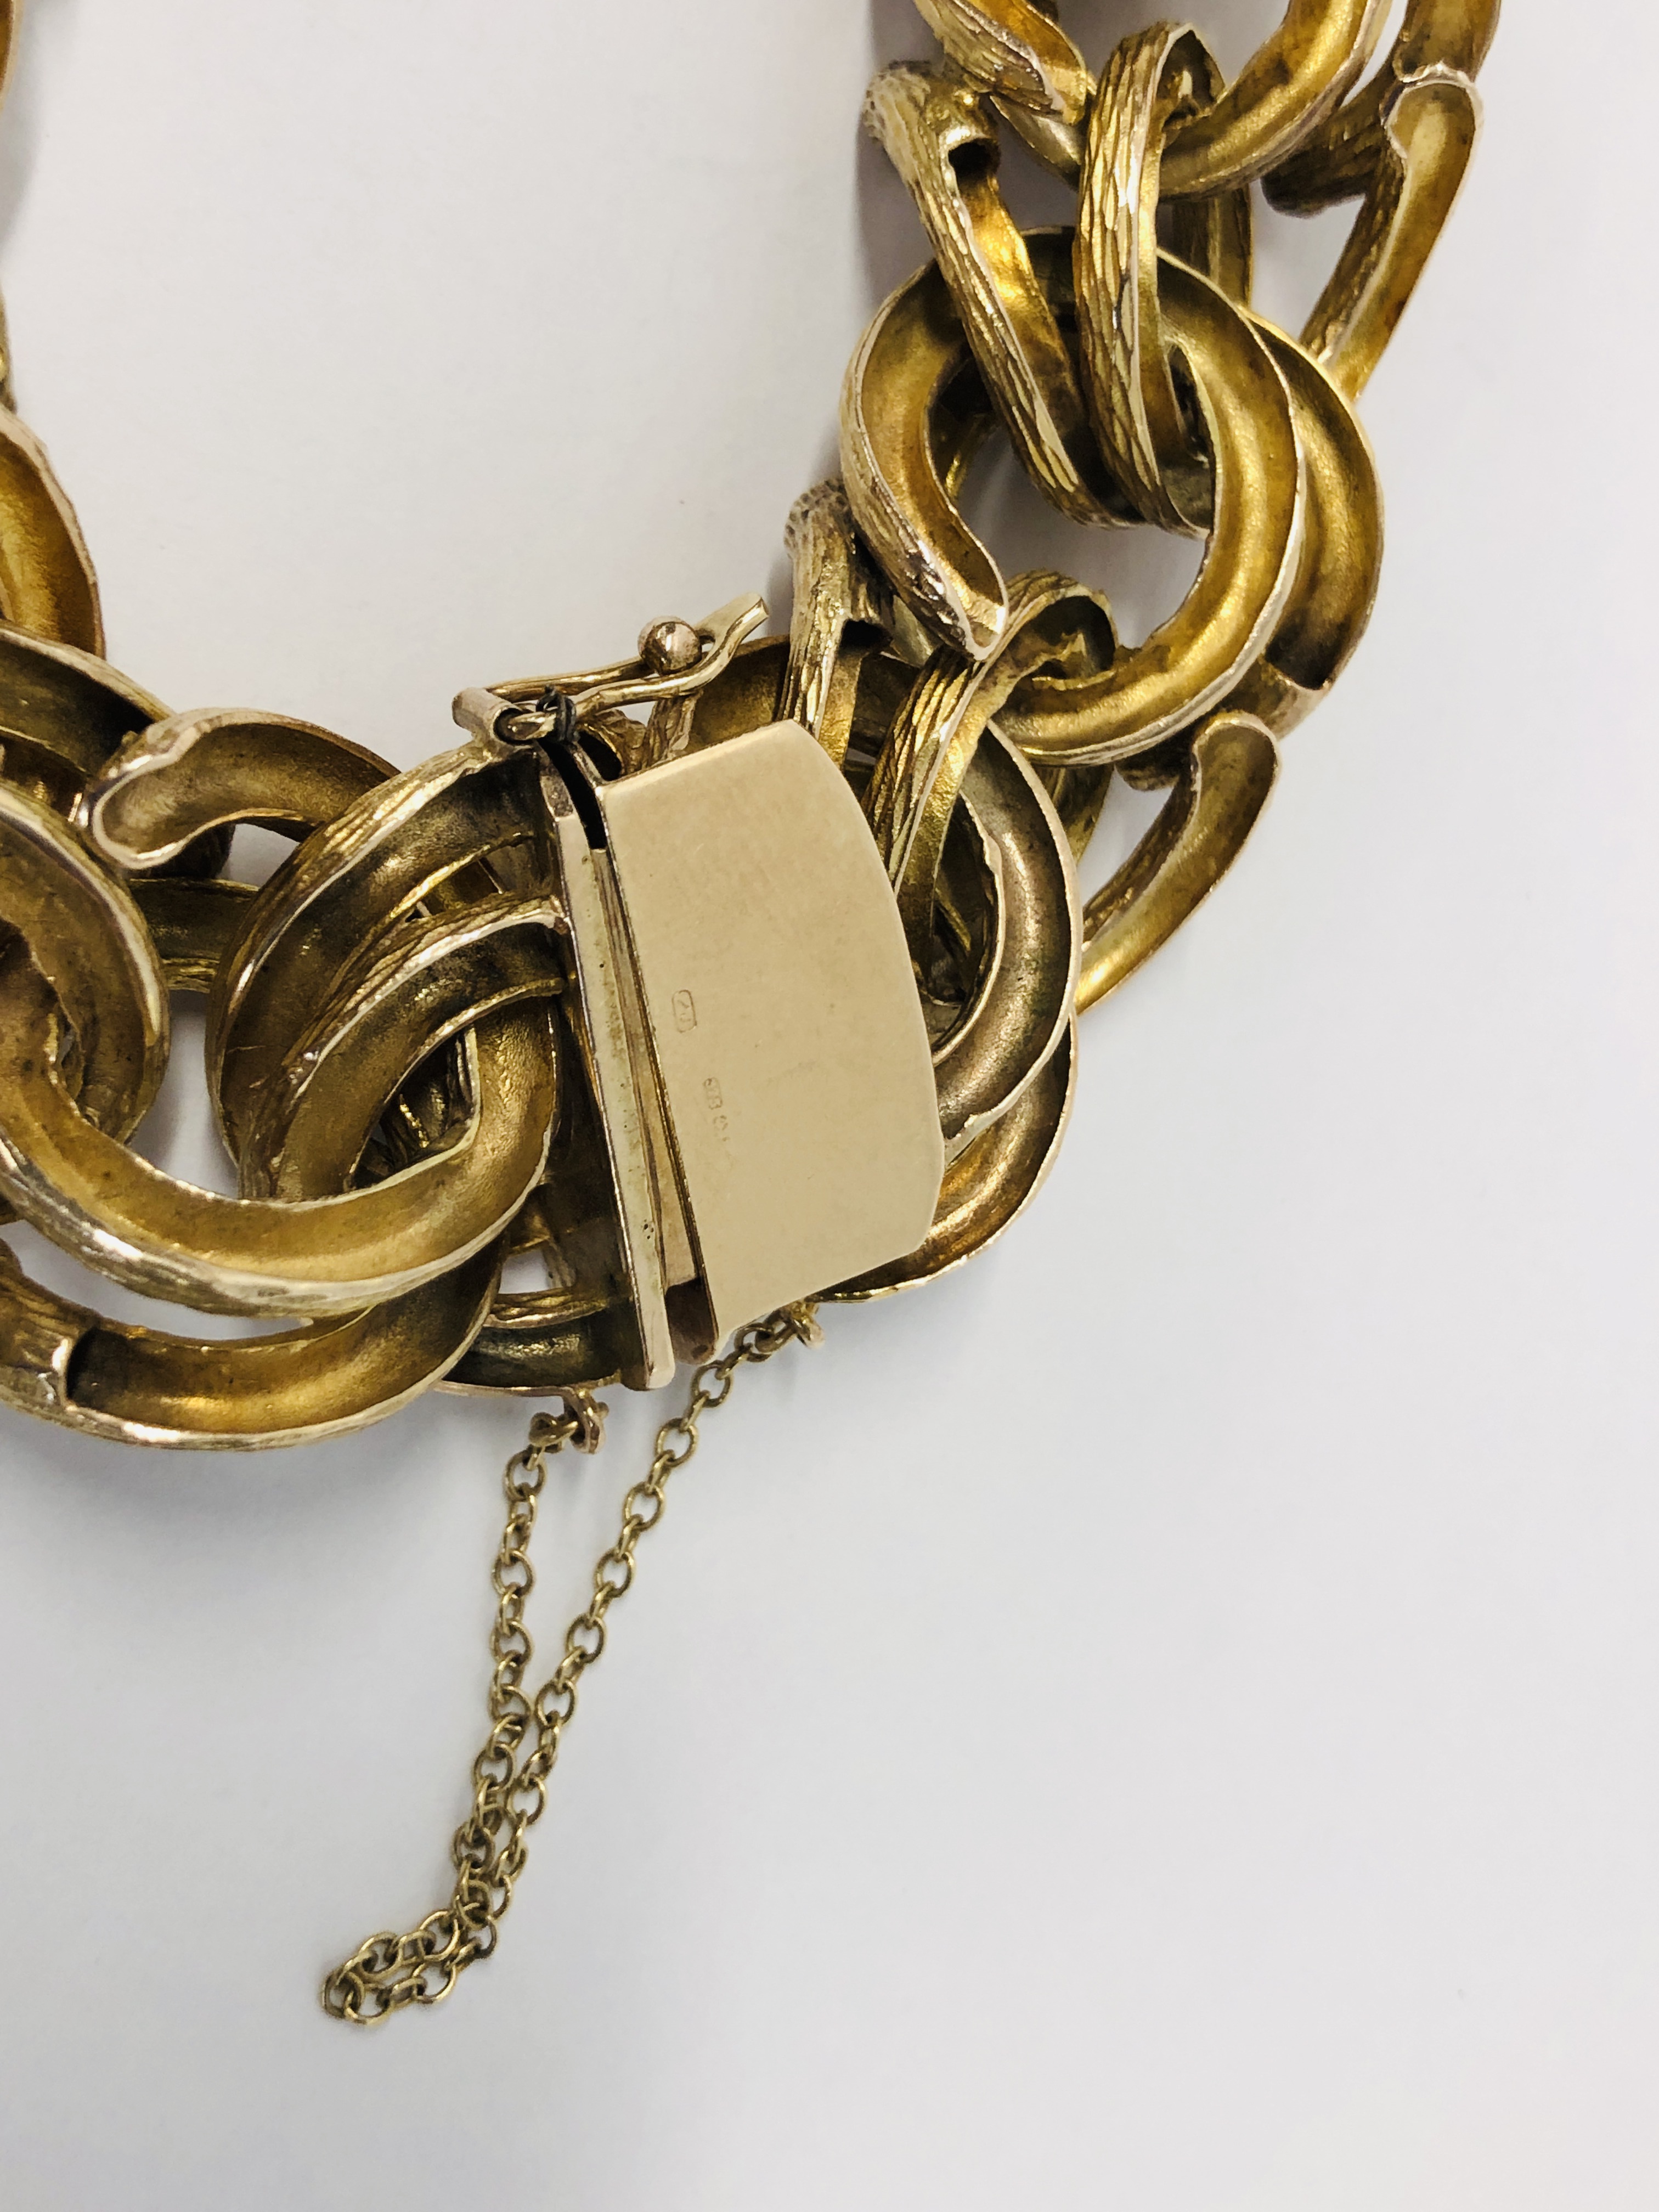 AN IMPRESSIVE 9CT. GOLD HEAVY BRACELET OF INTERWOVEN DESIGN, WITH SAFETY CHAIN. - Image 7 of 11